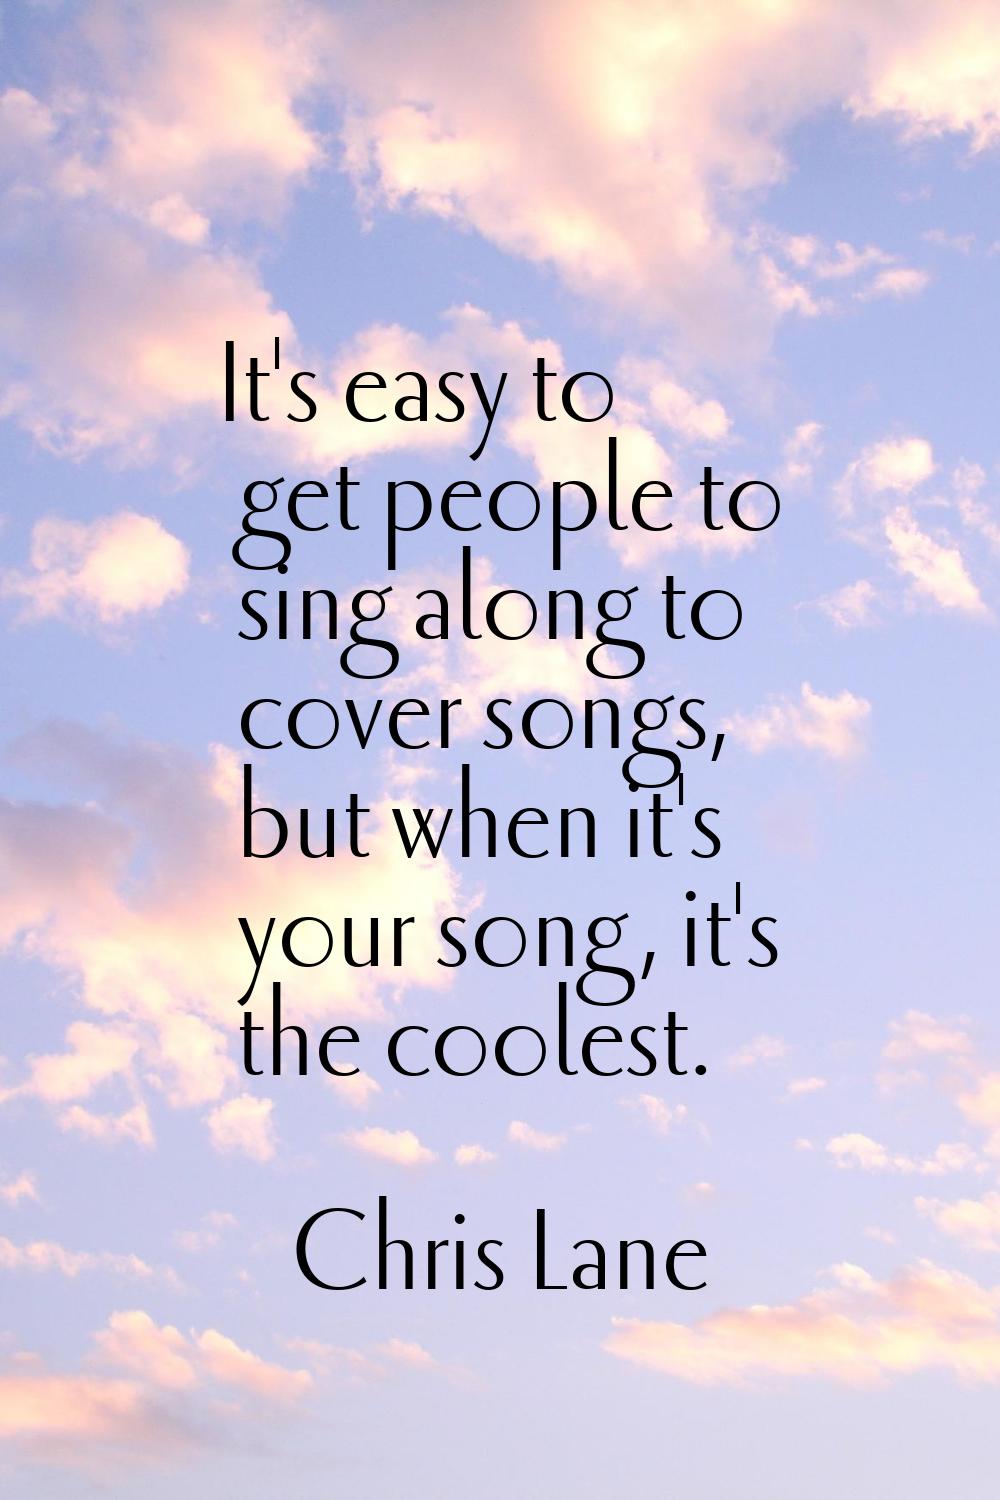 It's easy to get people to sing along to cover songs, but when it's your song, it's the coolest.